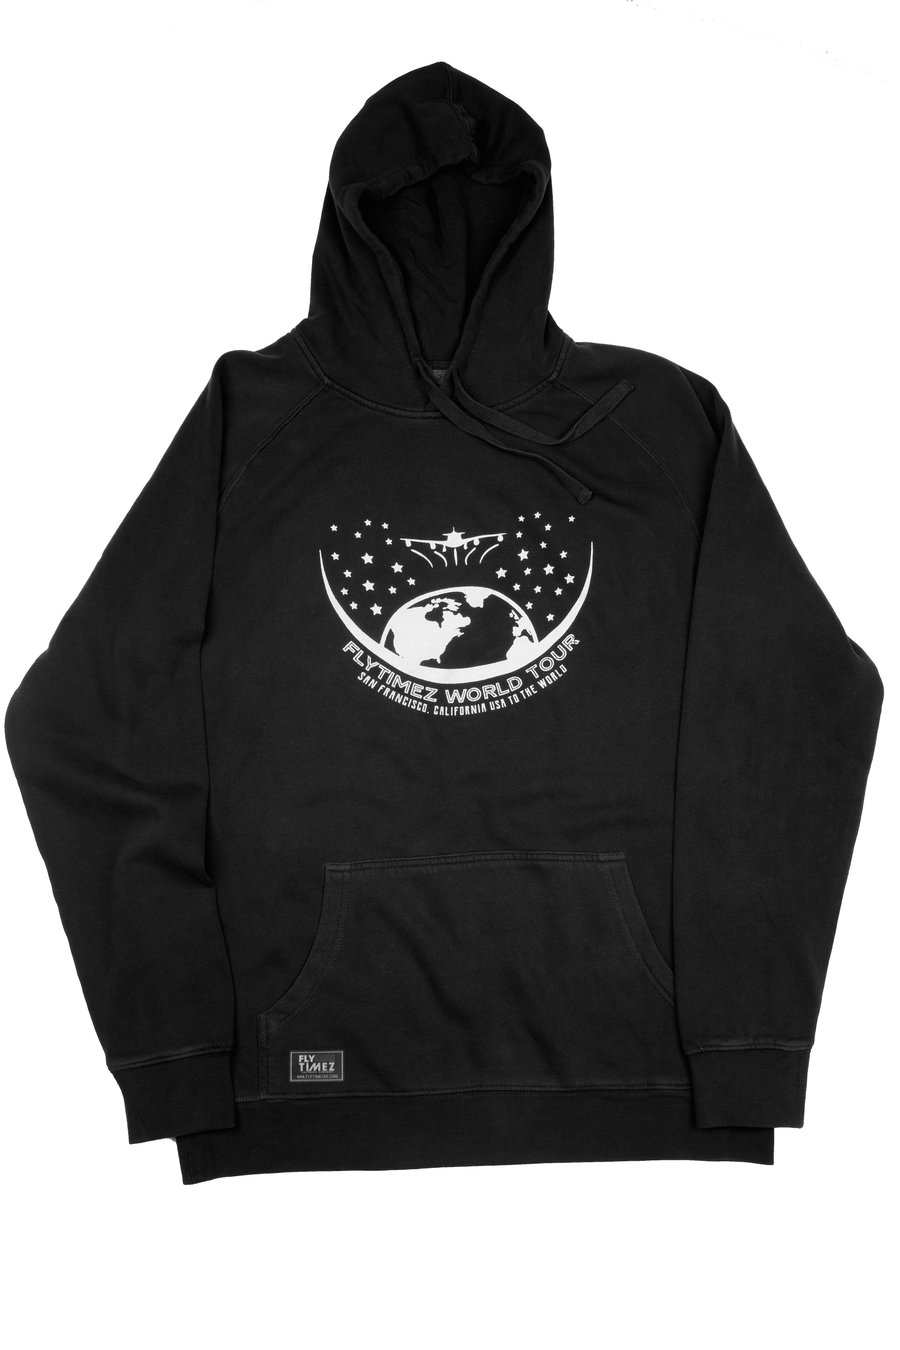 Image of FlyTimez "World Tour" Faded Hoodie (GLOW)